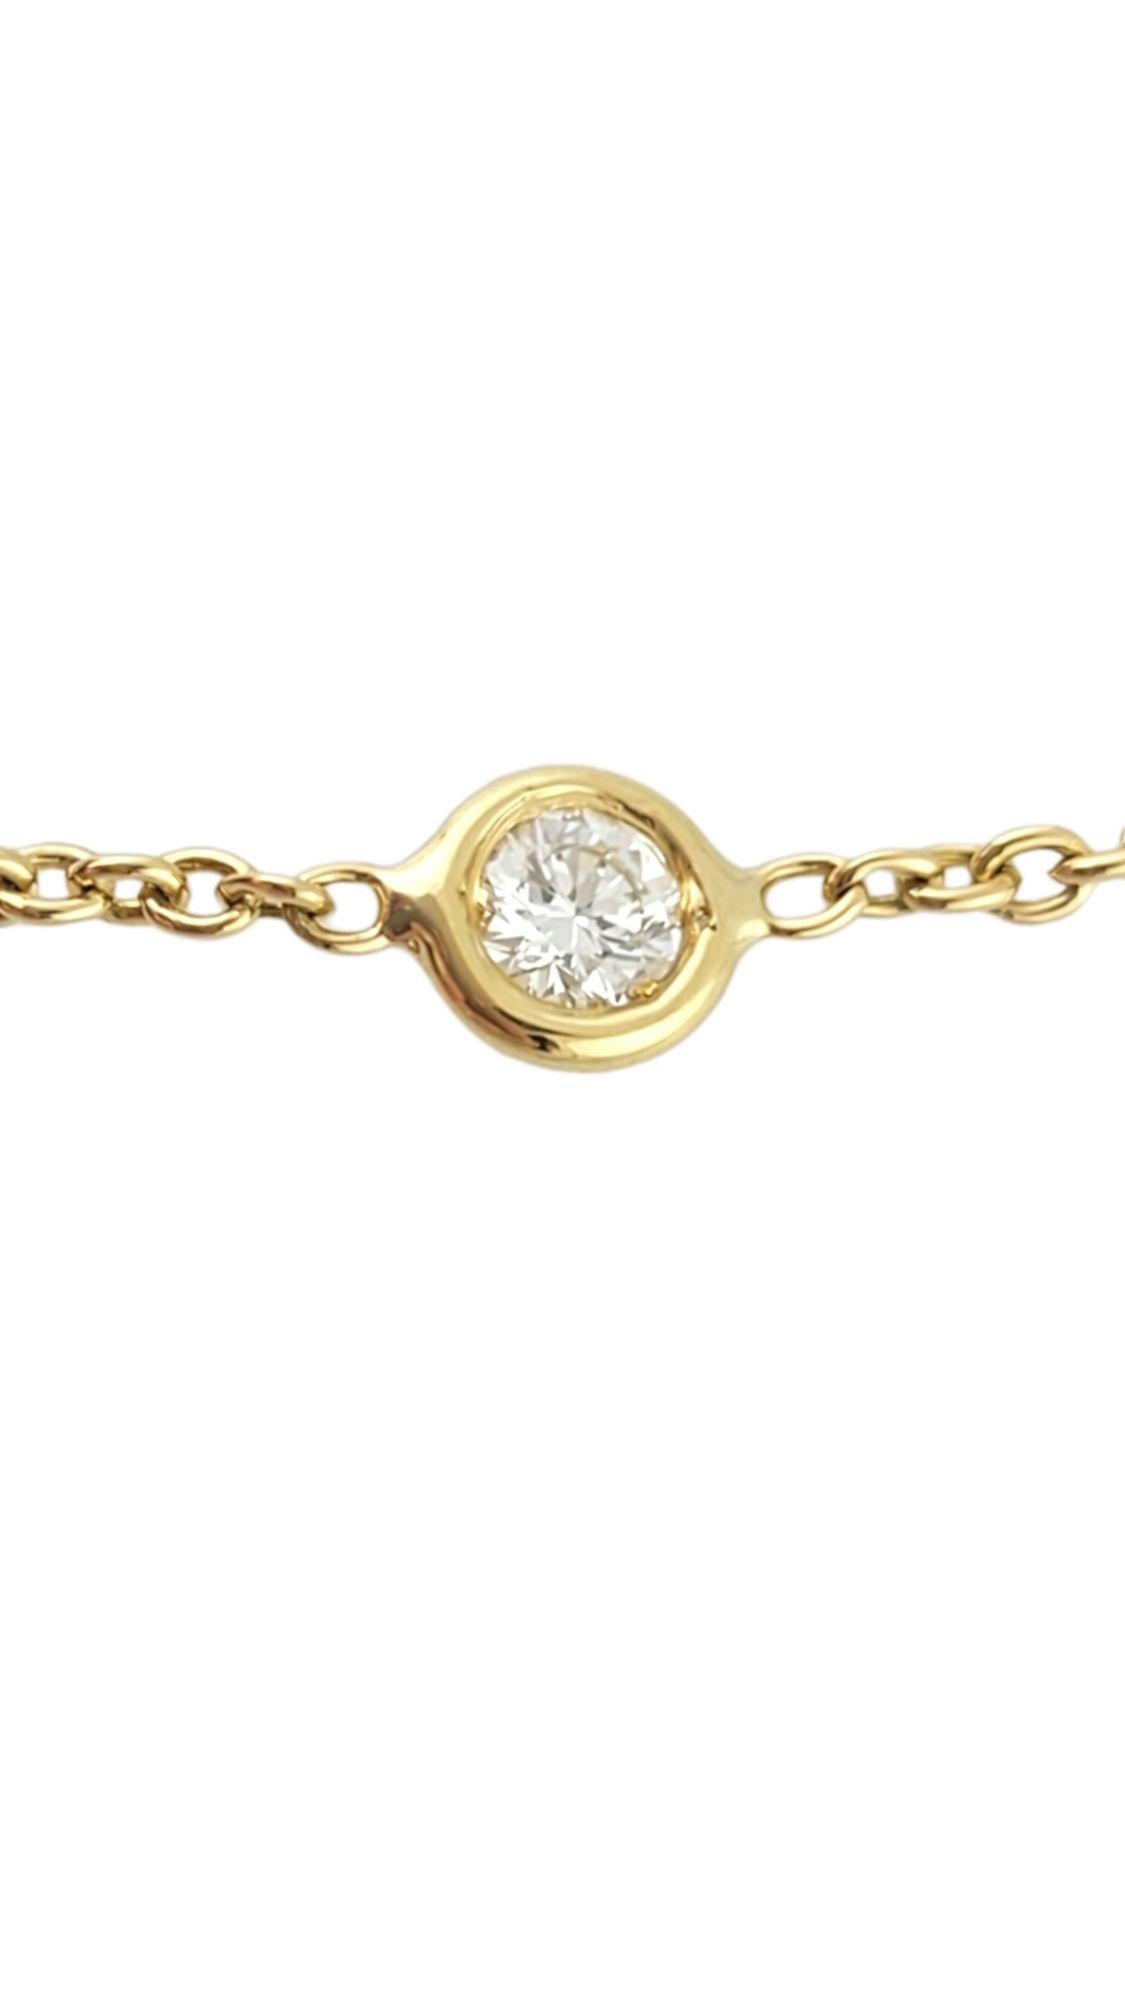 Roberto Coin 18K Yellow Gold Diamond by Inch 12 Station Necklace

Beautiful Roberto Coin chain necklace crafted from 18K yellow gold and decorated with 12 sparkling, round cut diamonds!

Approximate total diamond weight: 1.20 cts.

Diamond clarity: